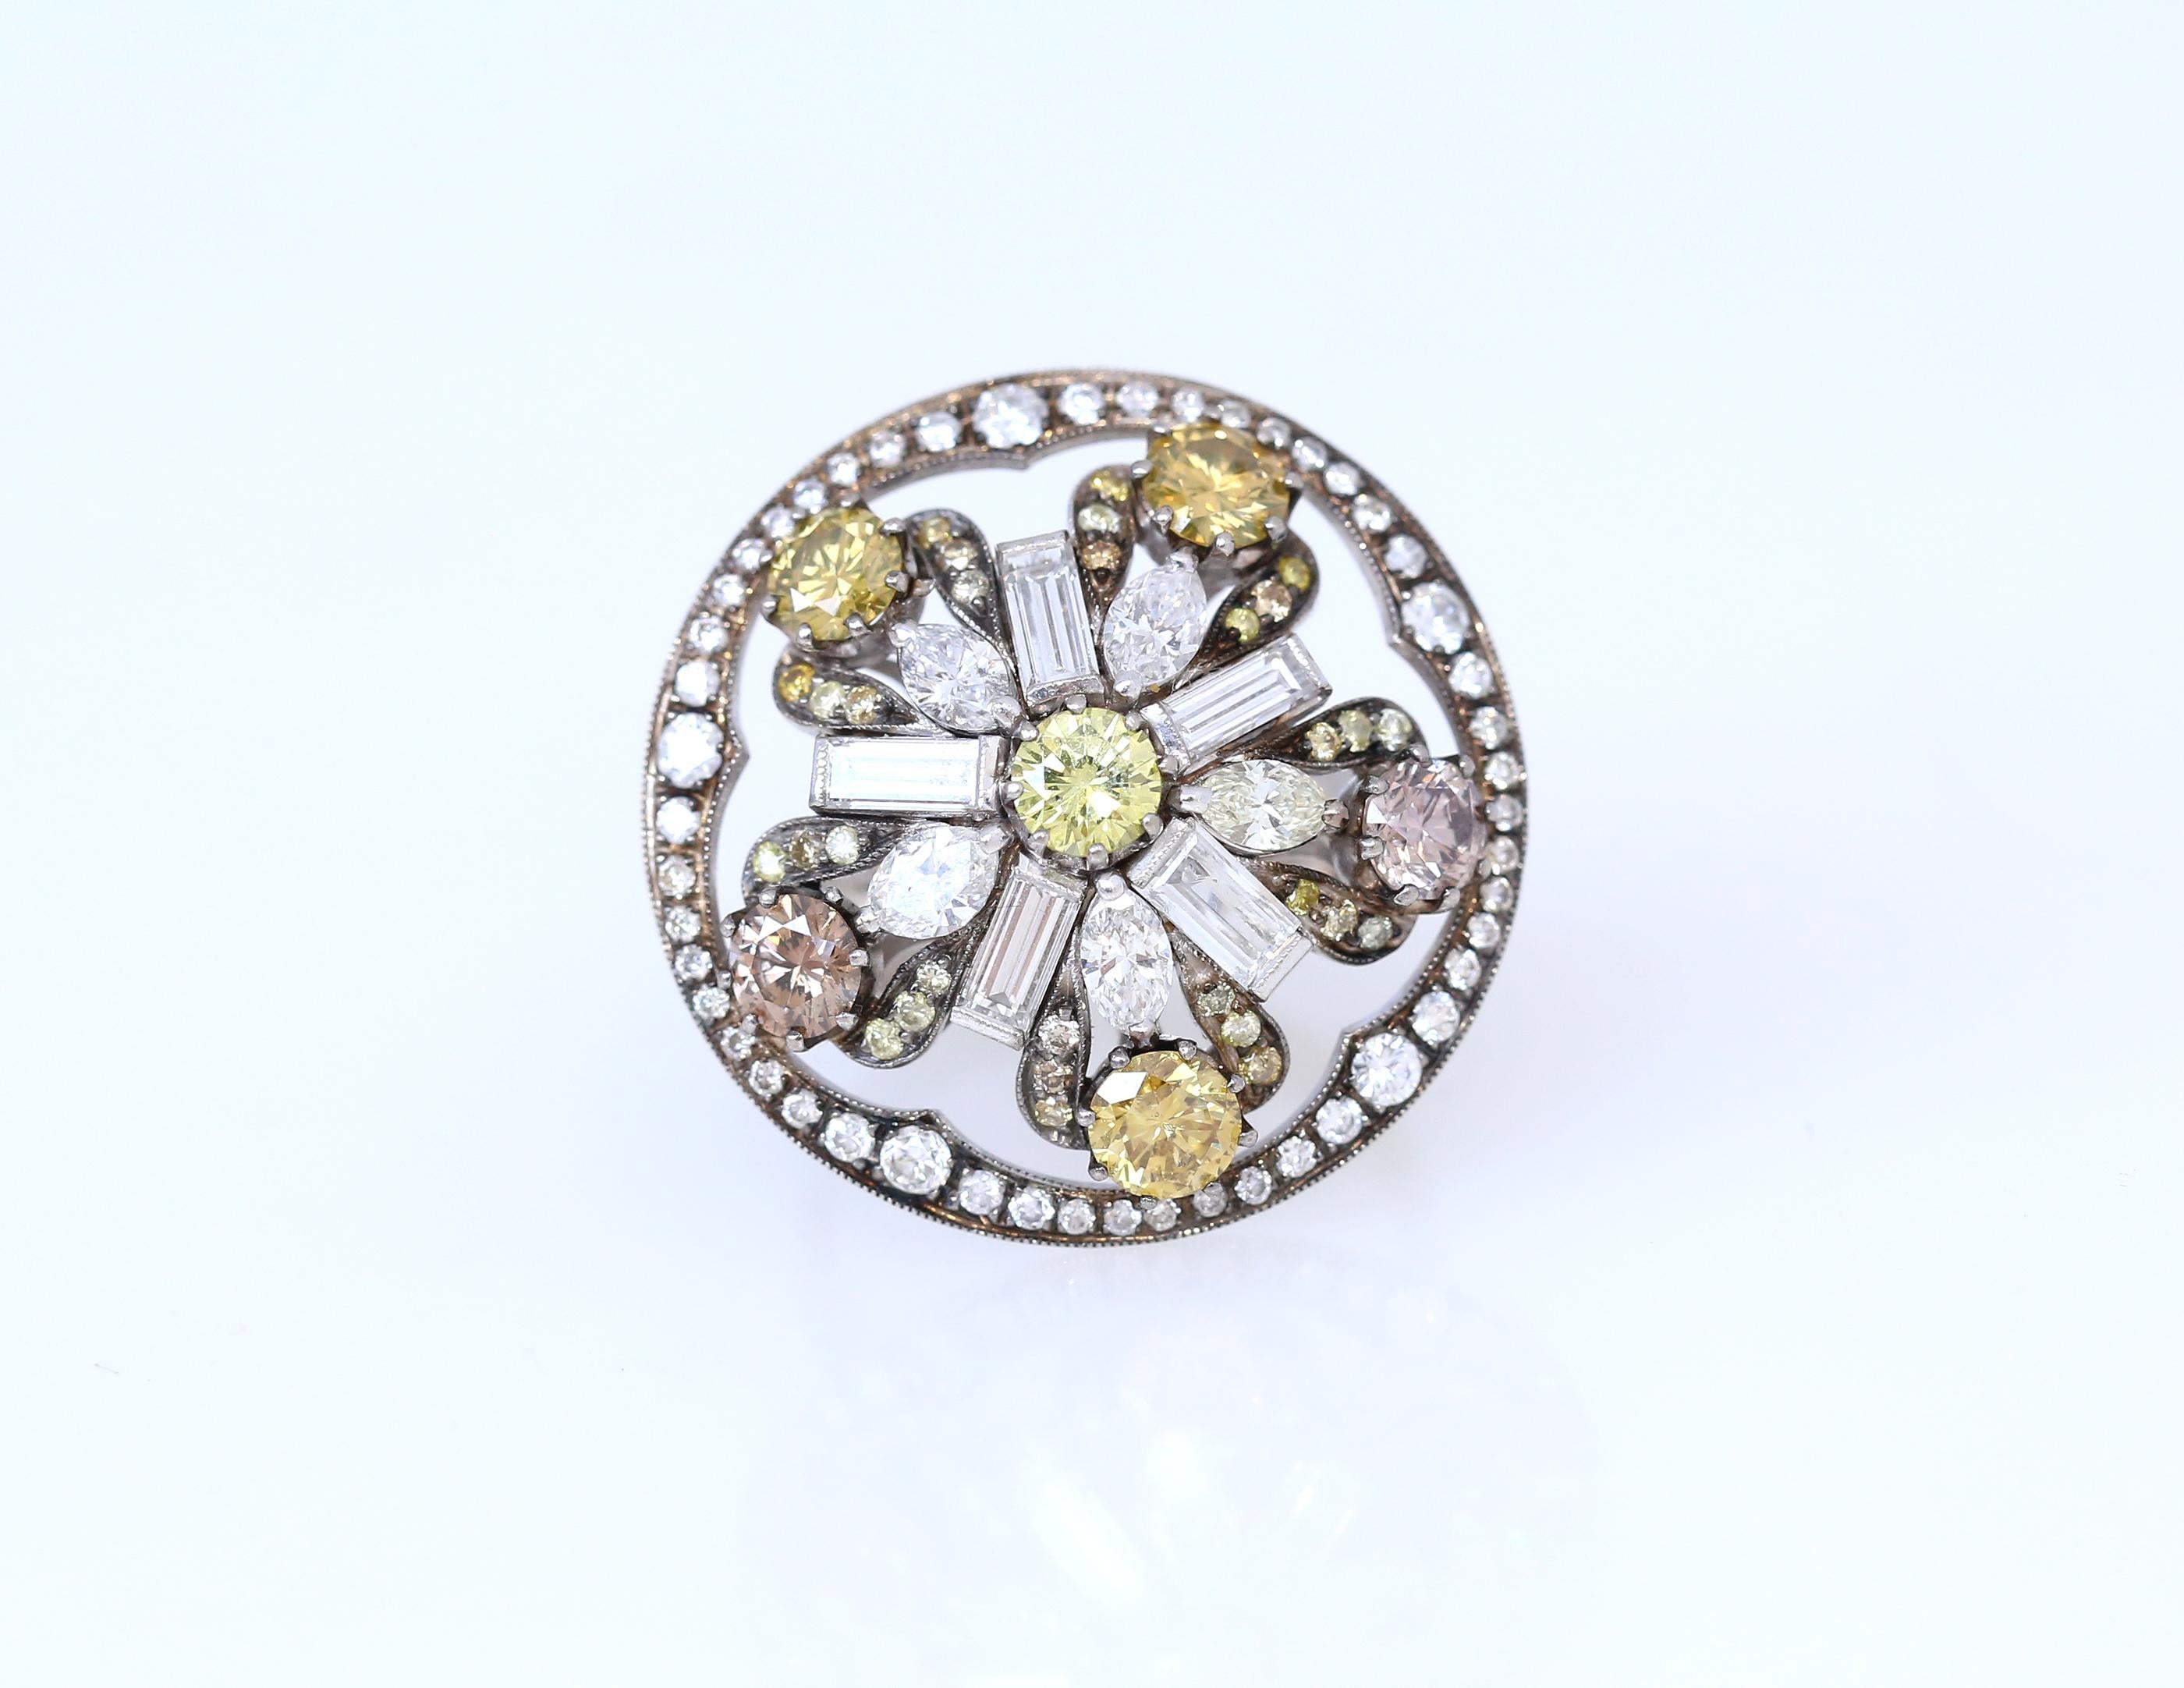 6 Fancy Diamonds of the different color grade Pink Green Light Yellow Light Brown
Each Diamond weighing 0.35Ct. Additional 2.8Ct of Round-cut and Baguette-cut White Diamonds. 
Unusual design, perfect present!
A truly amazing ring for a Diamond